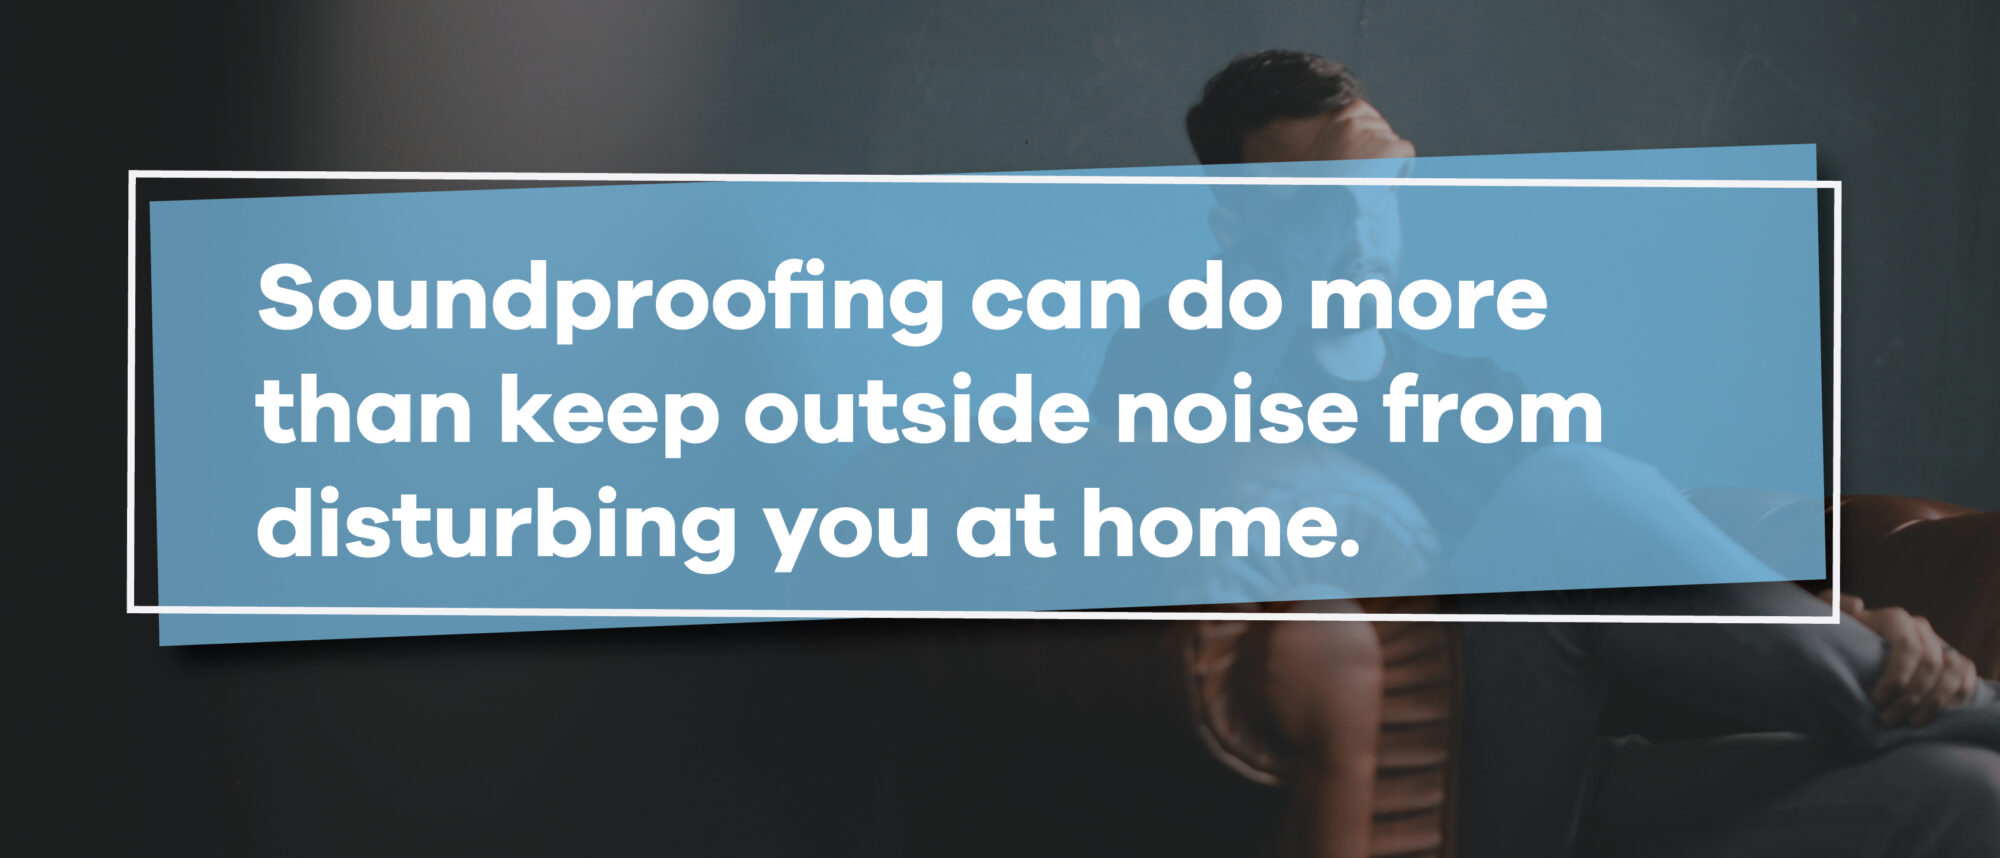 soundproofing is more than keeping out outside noise